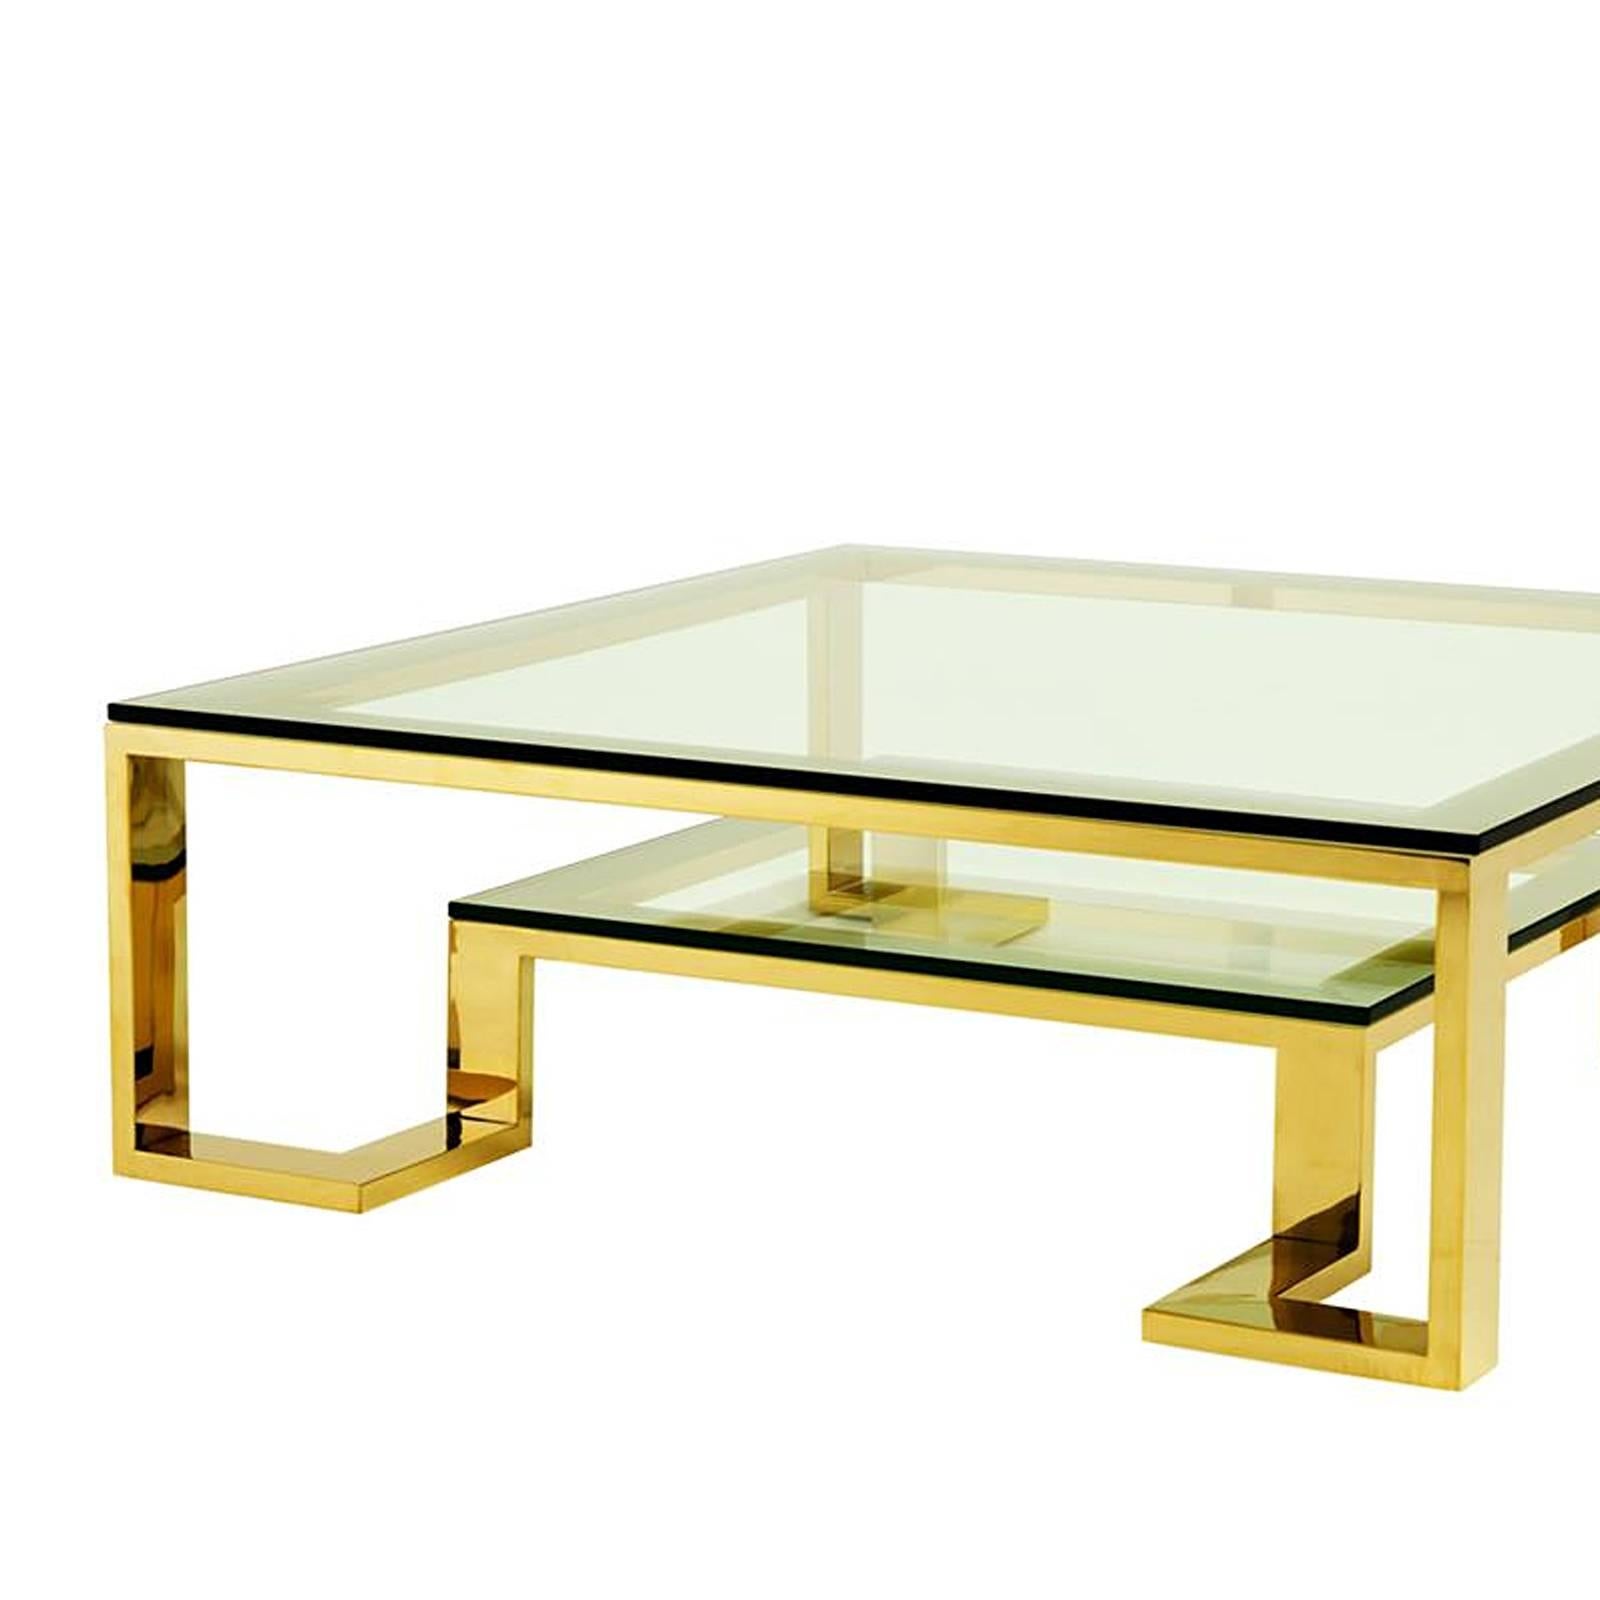 Coffee table wishper with structure in polished stainless
steel in gold finish and clear glass tops. Also available with
structure in polished stainless steel in chrome finish with clear
glass tops. 